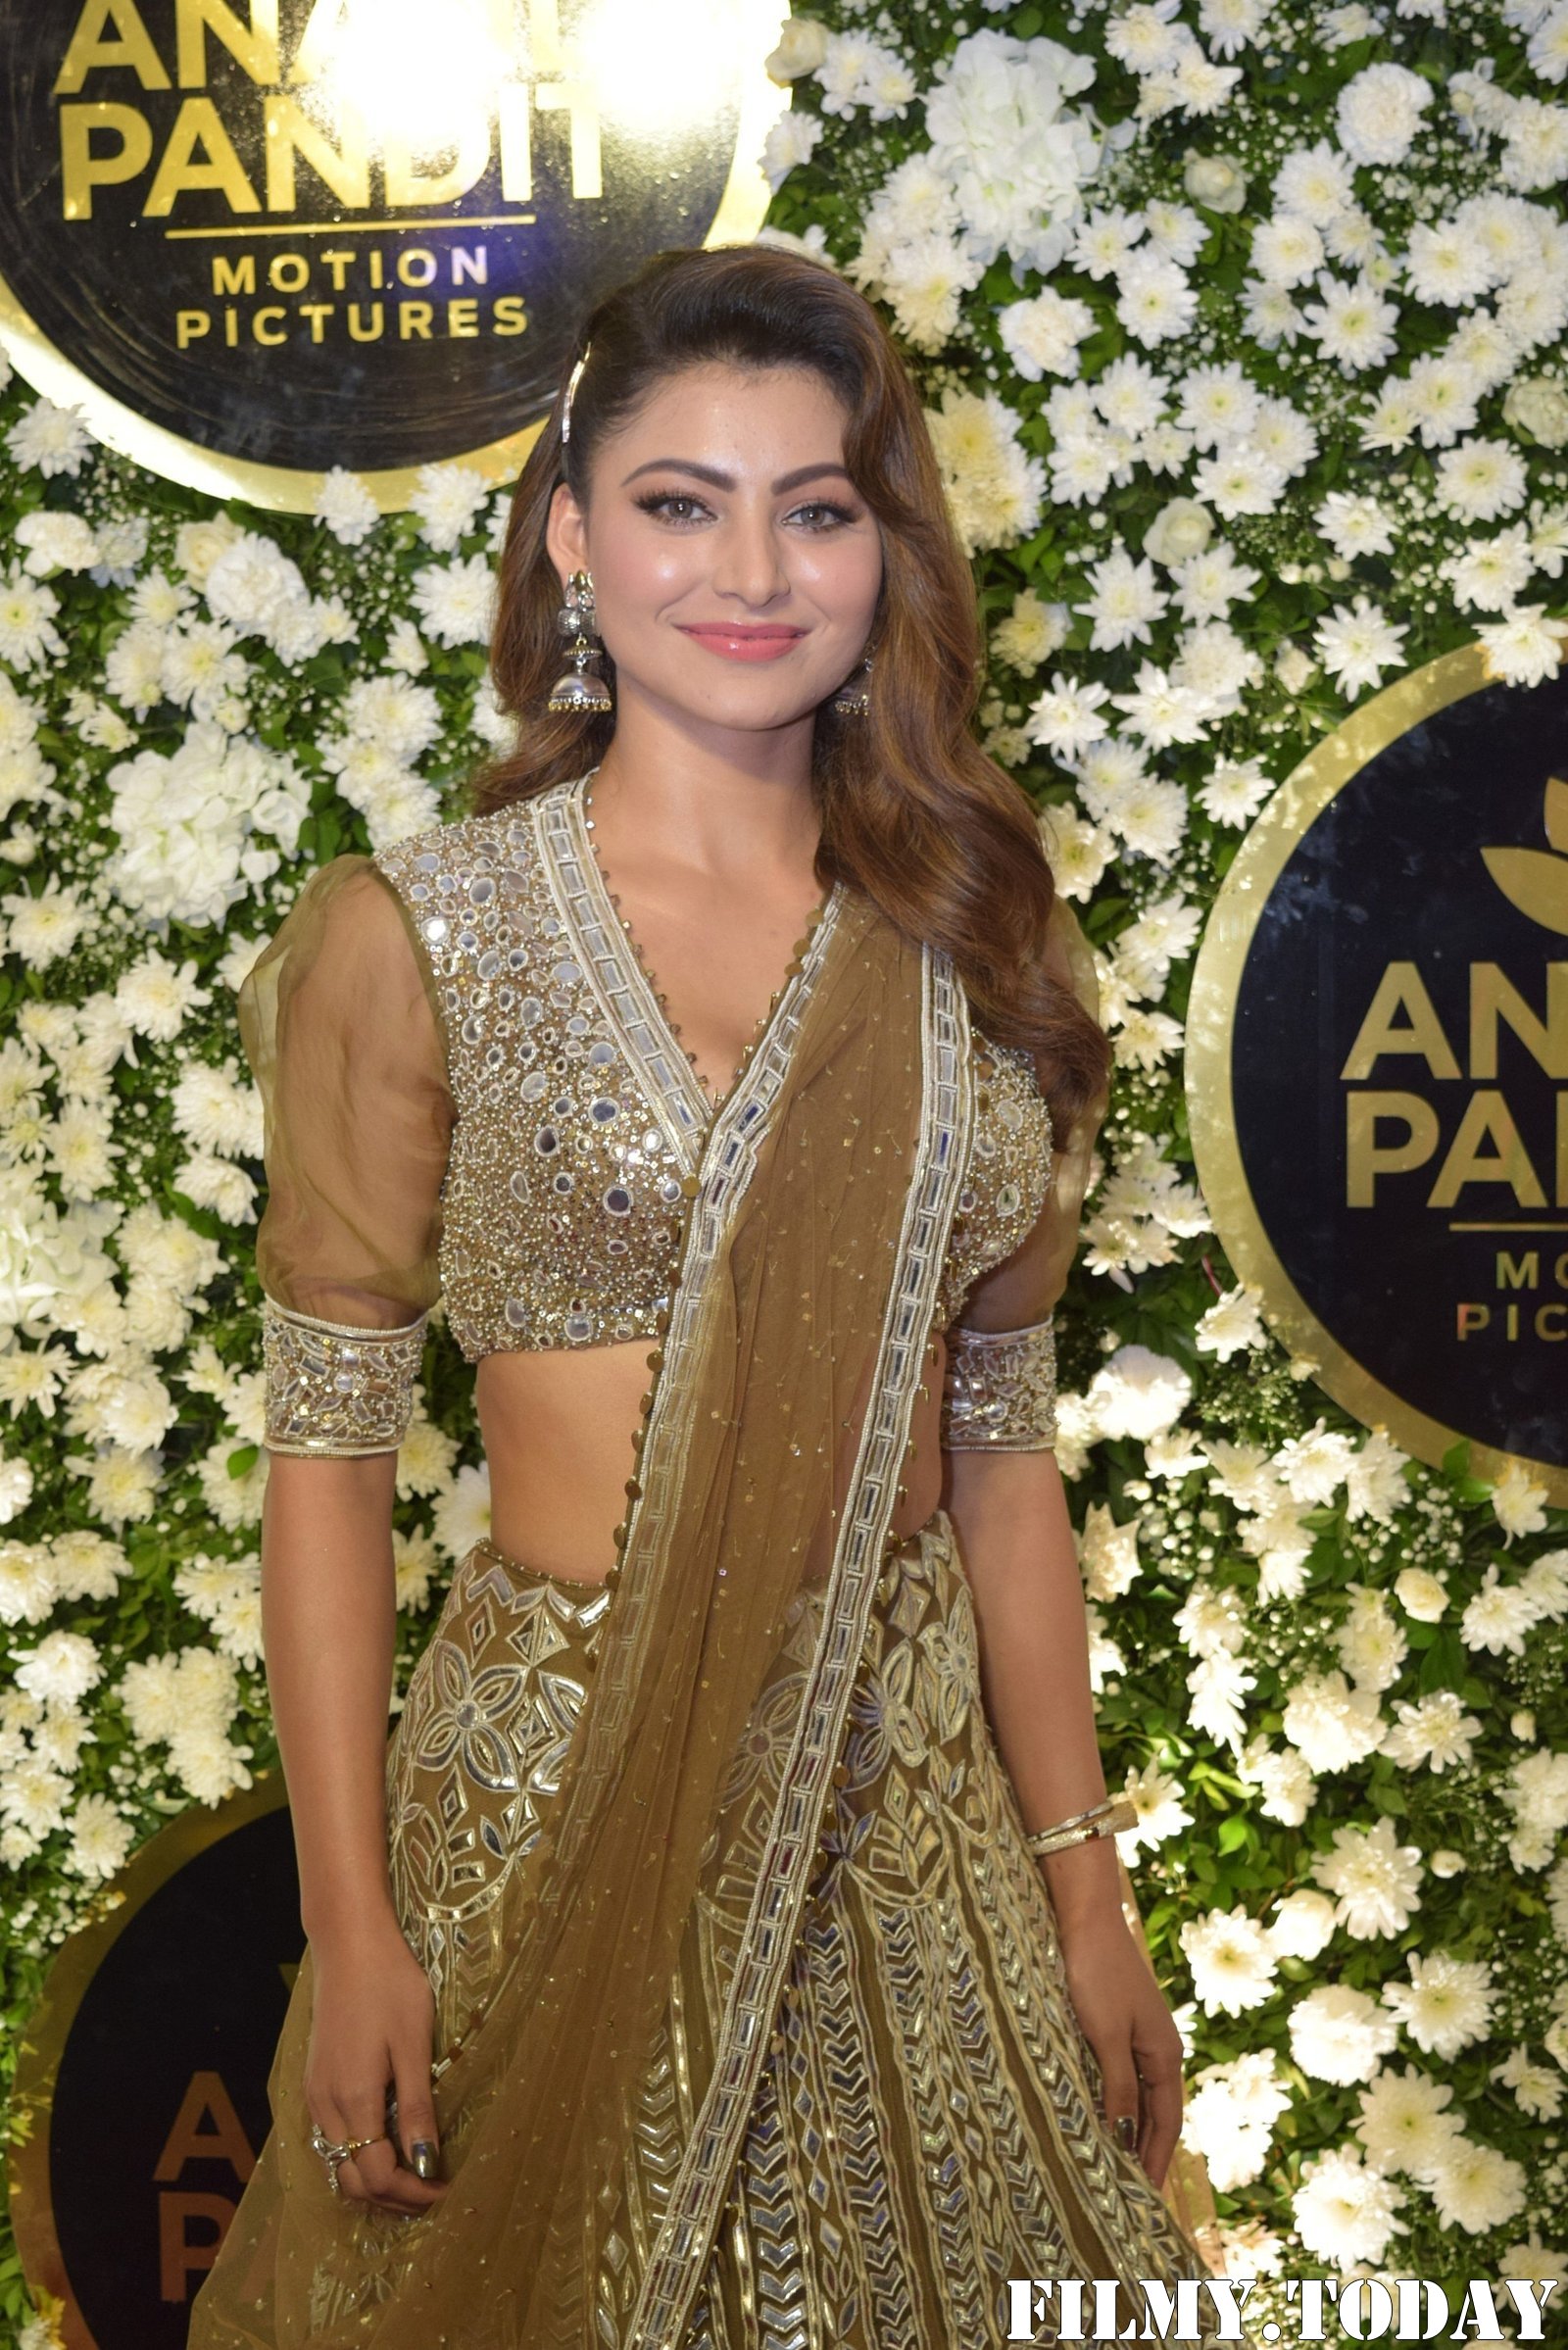 Urvashi Rautela - Photos: Celebs At Anand Pandit's Diwali Party | Picture 1693675